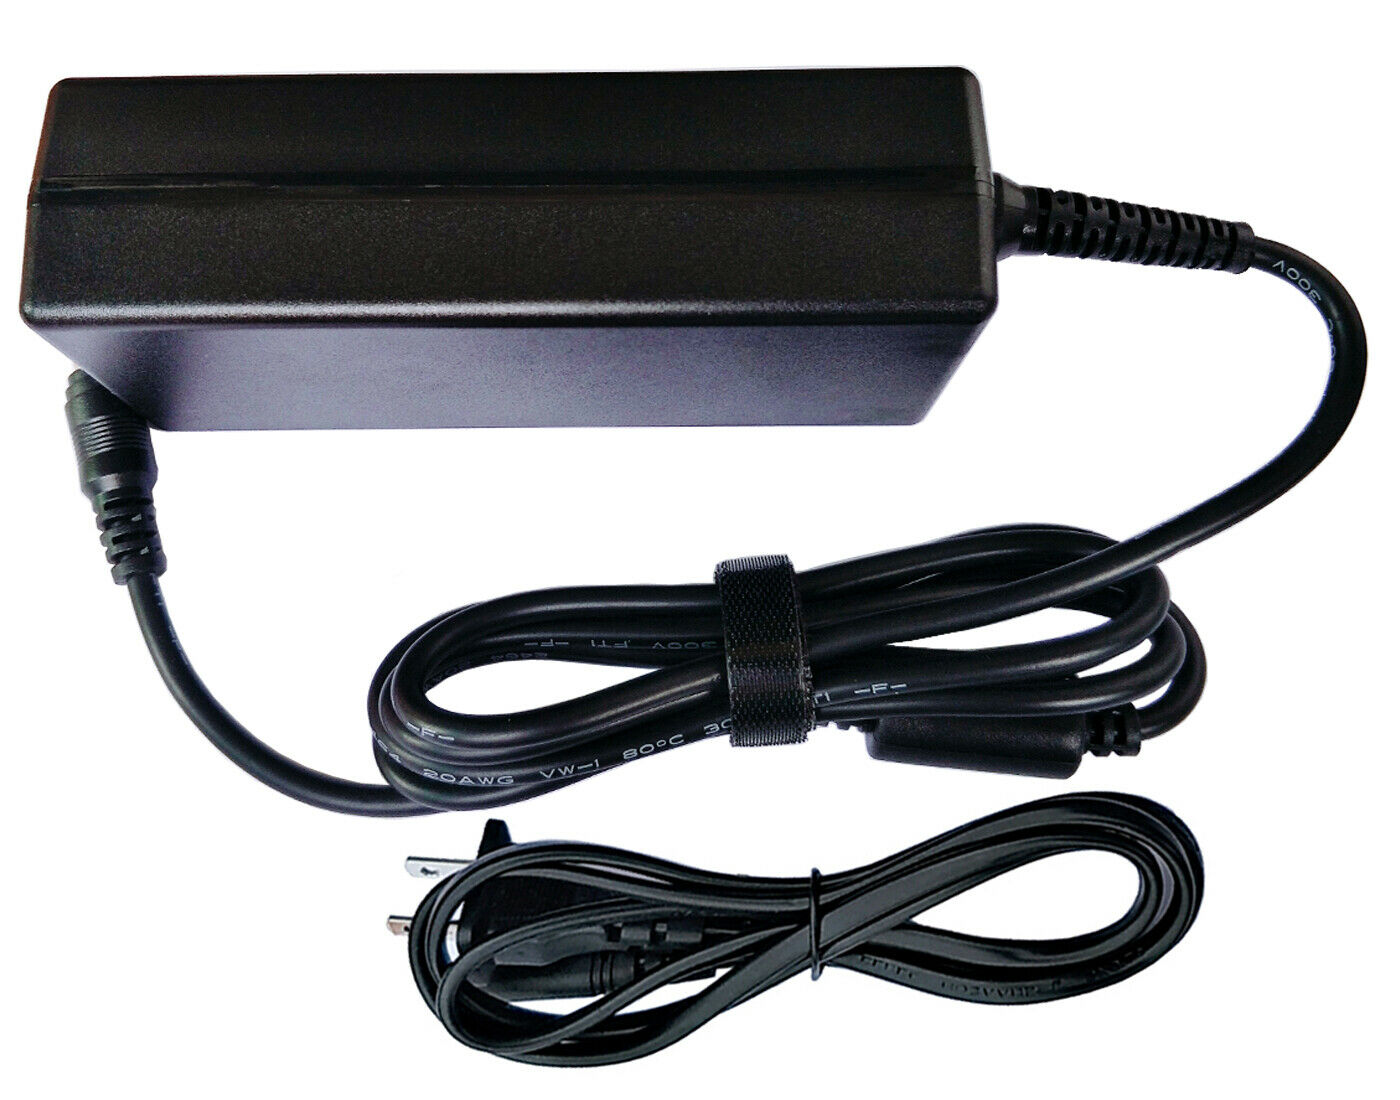 12V AC Adapter For Belkin F4U055WW Thunderbolt Express Dock Power Supply Charger Technical Specific